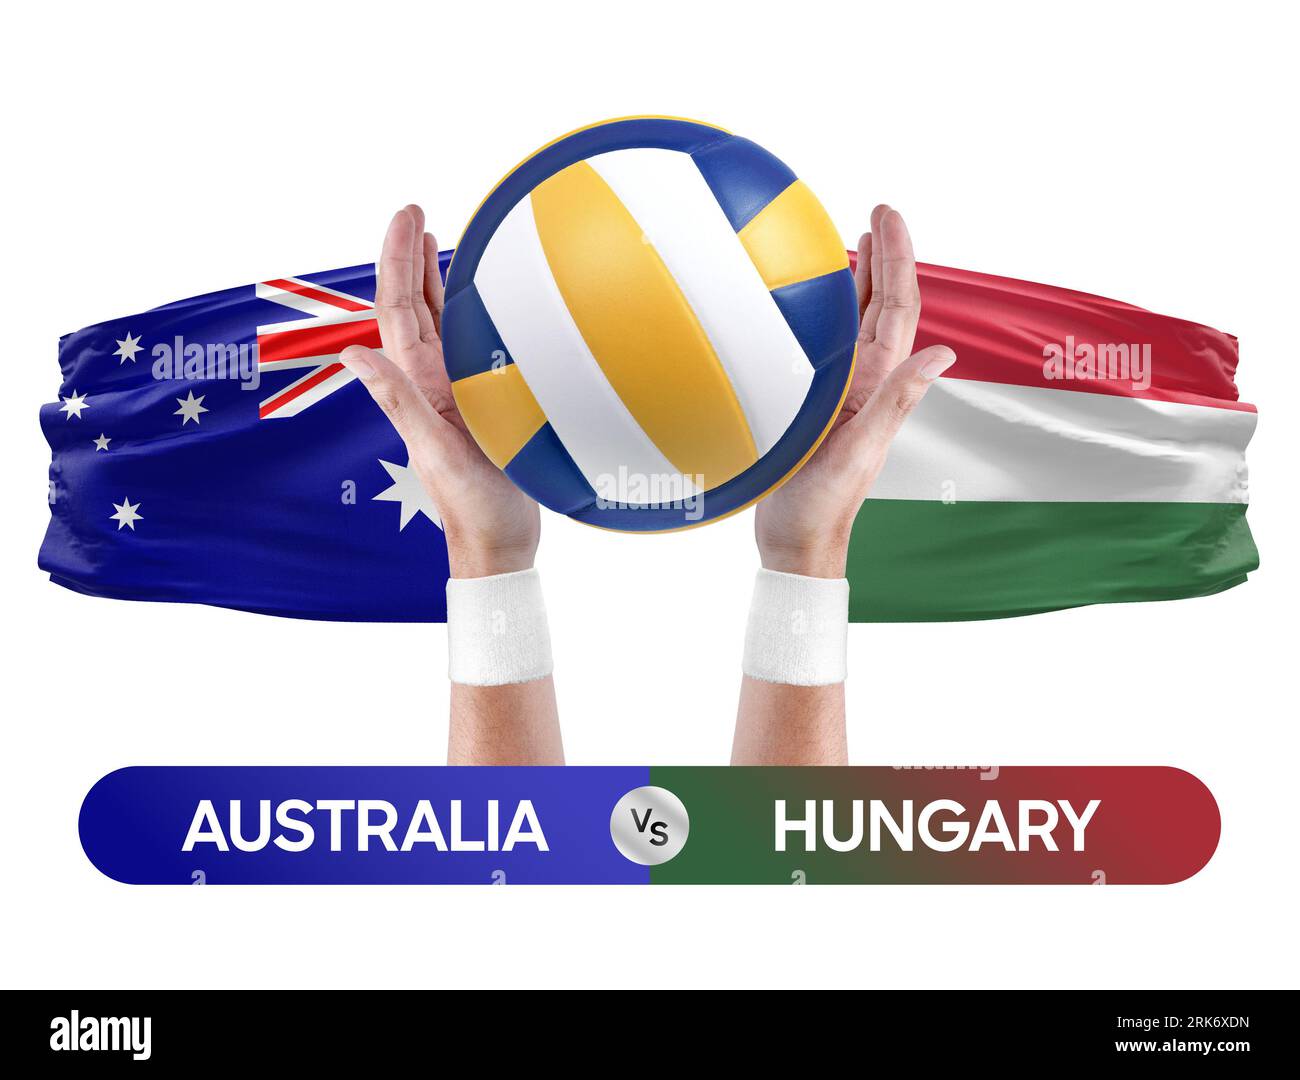 Australia vs Hungary national teams volleyball volley ball match competition concept. Stock Photo